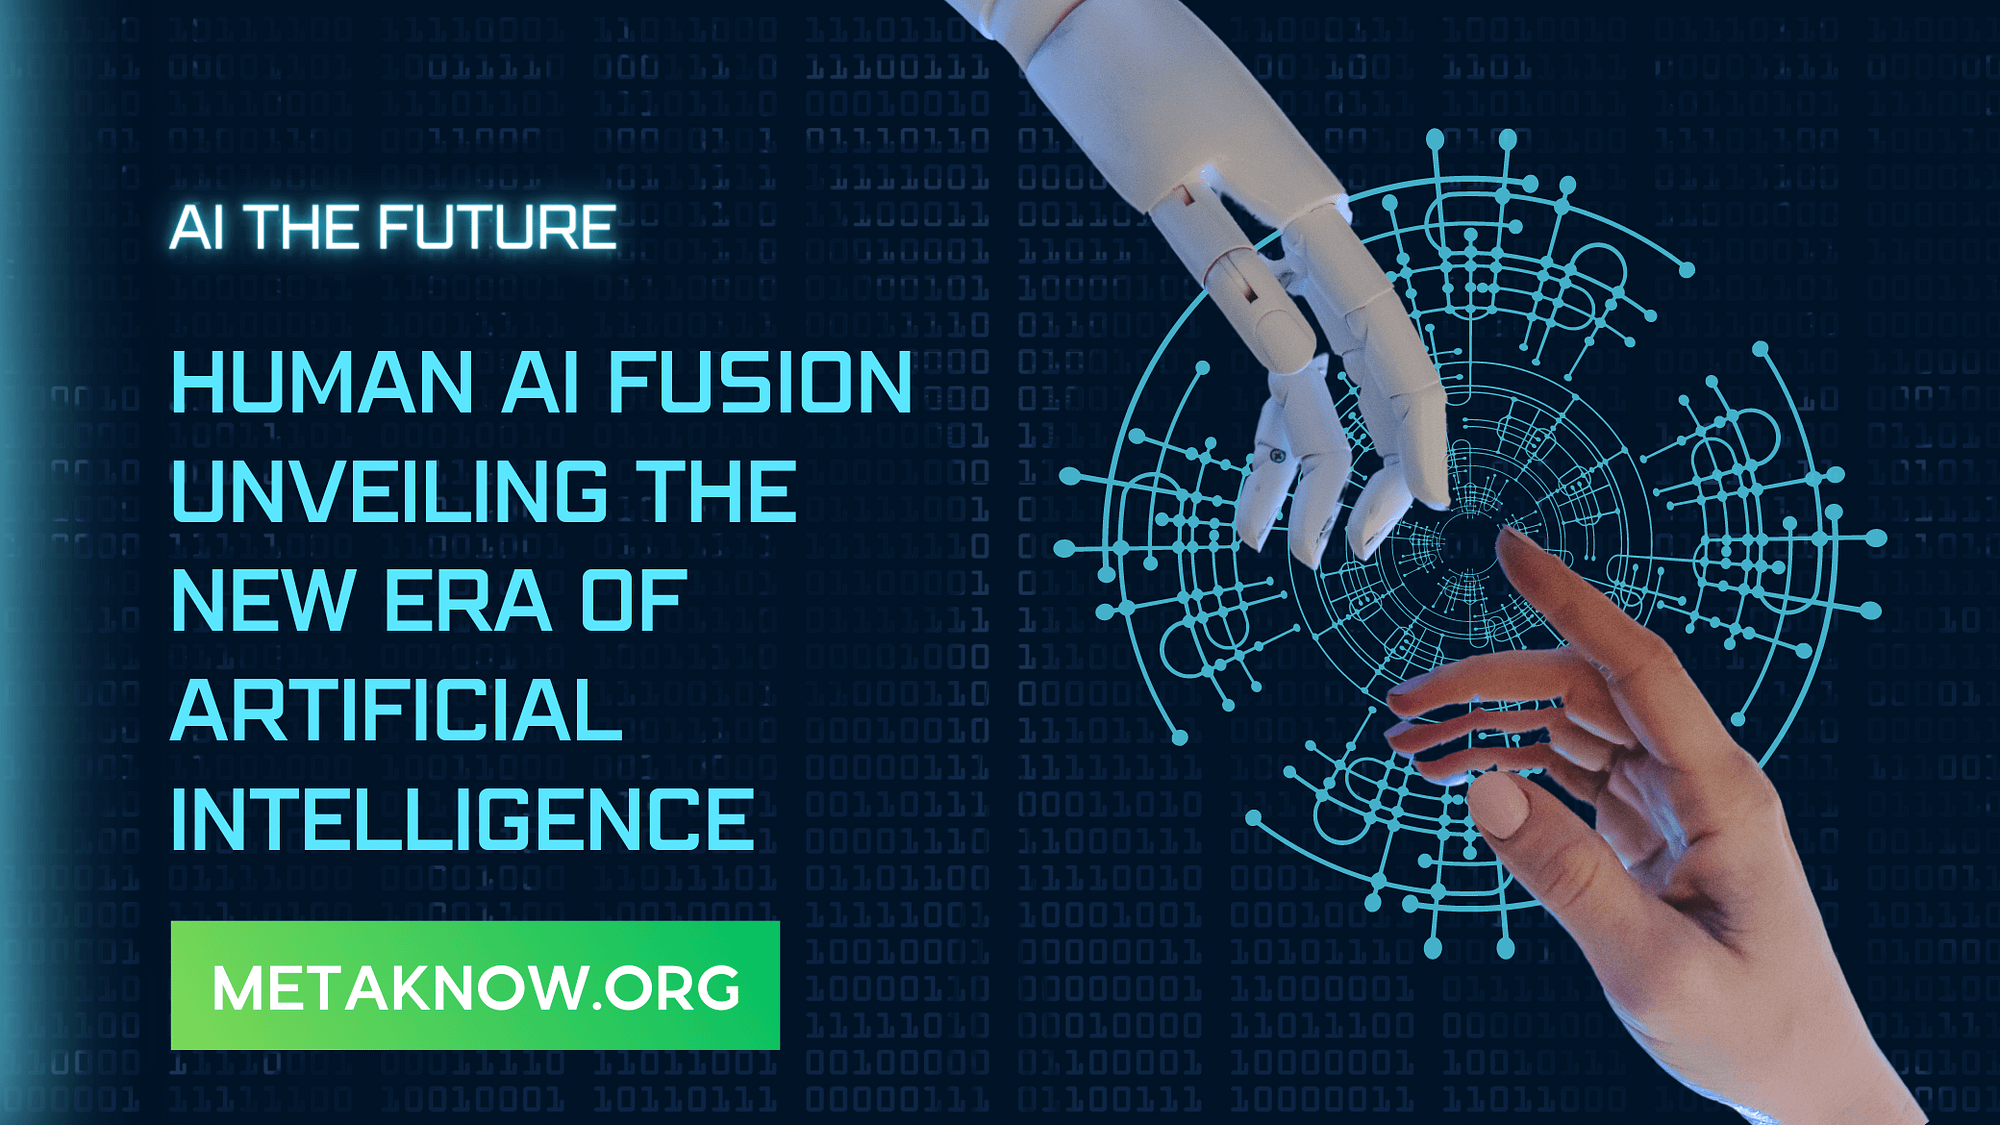 Human AI Fusion Unveiling the New Era of Artificial Intelligence